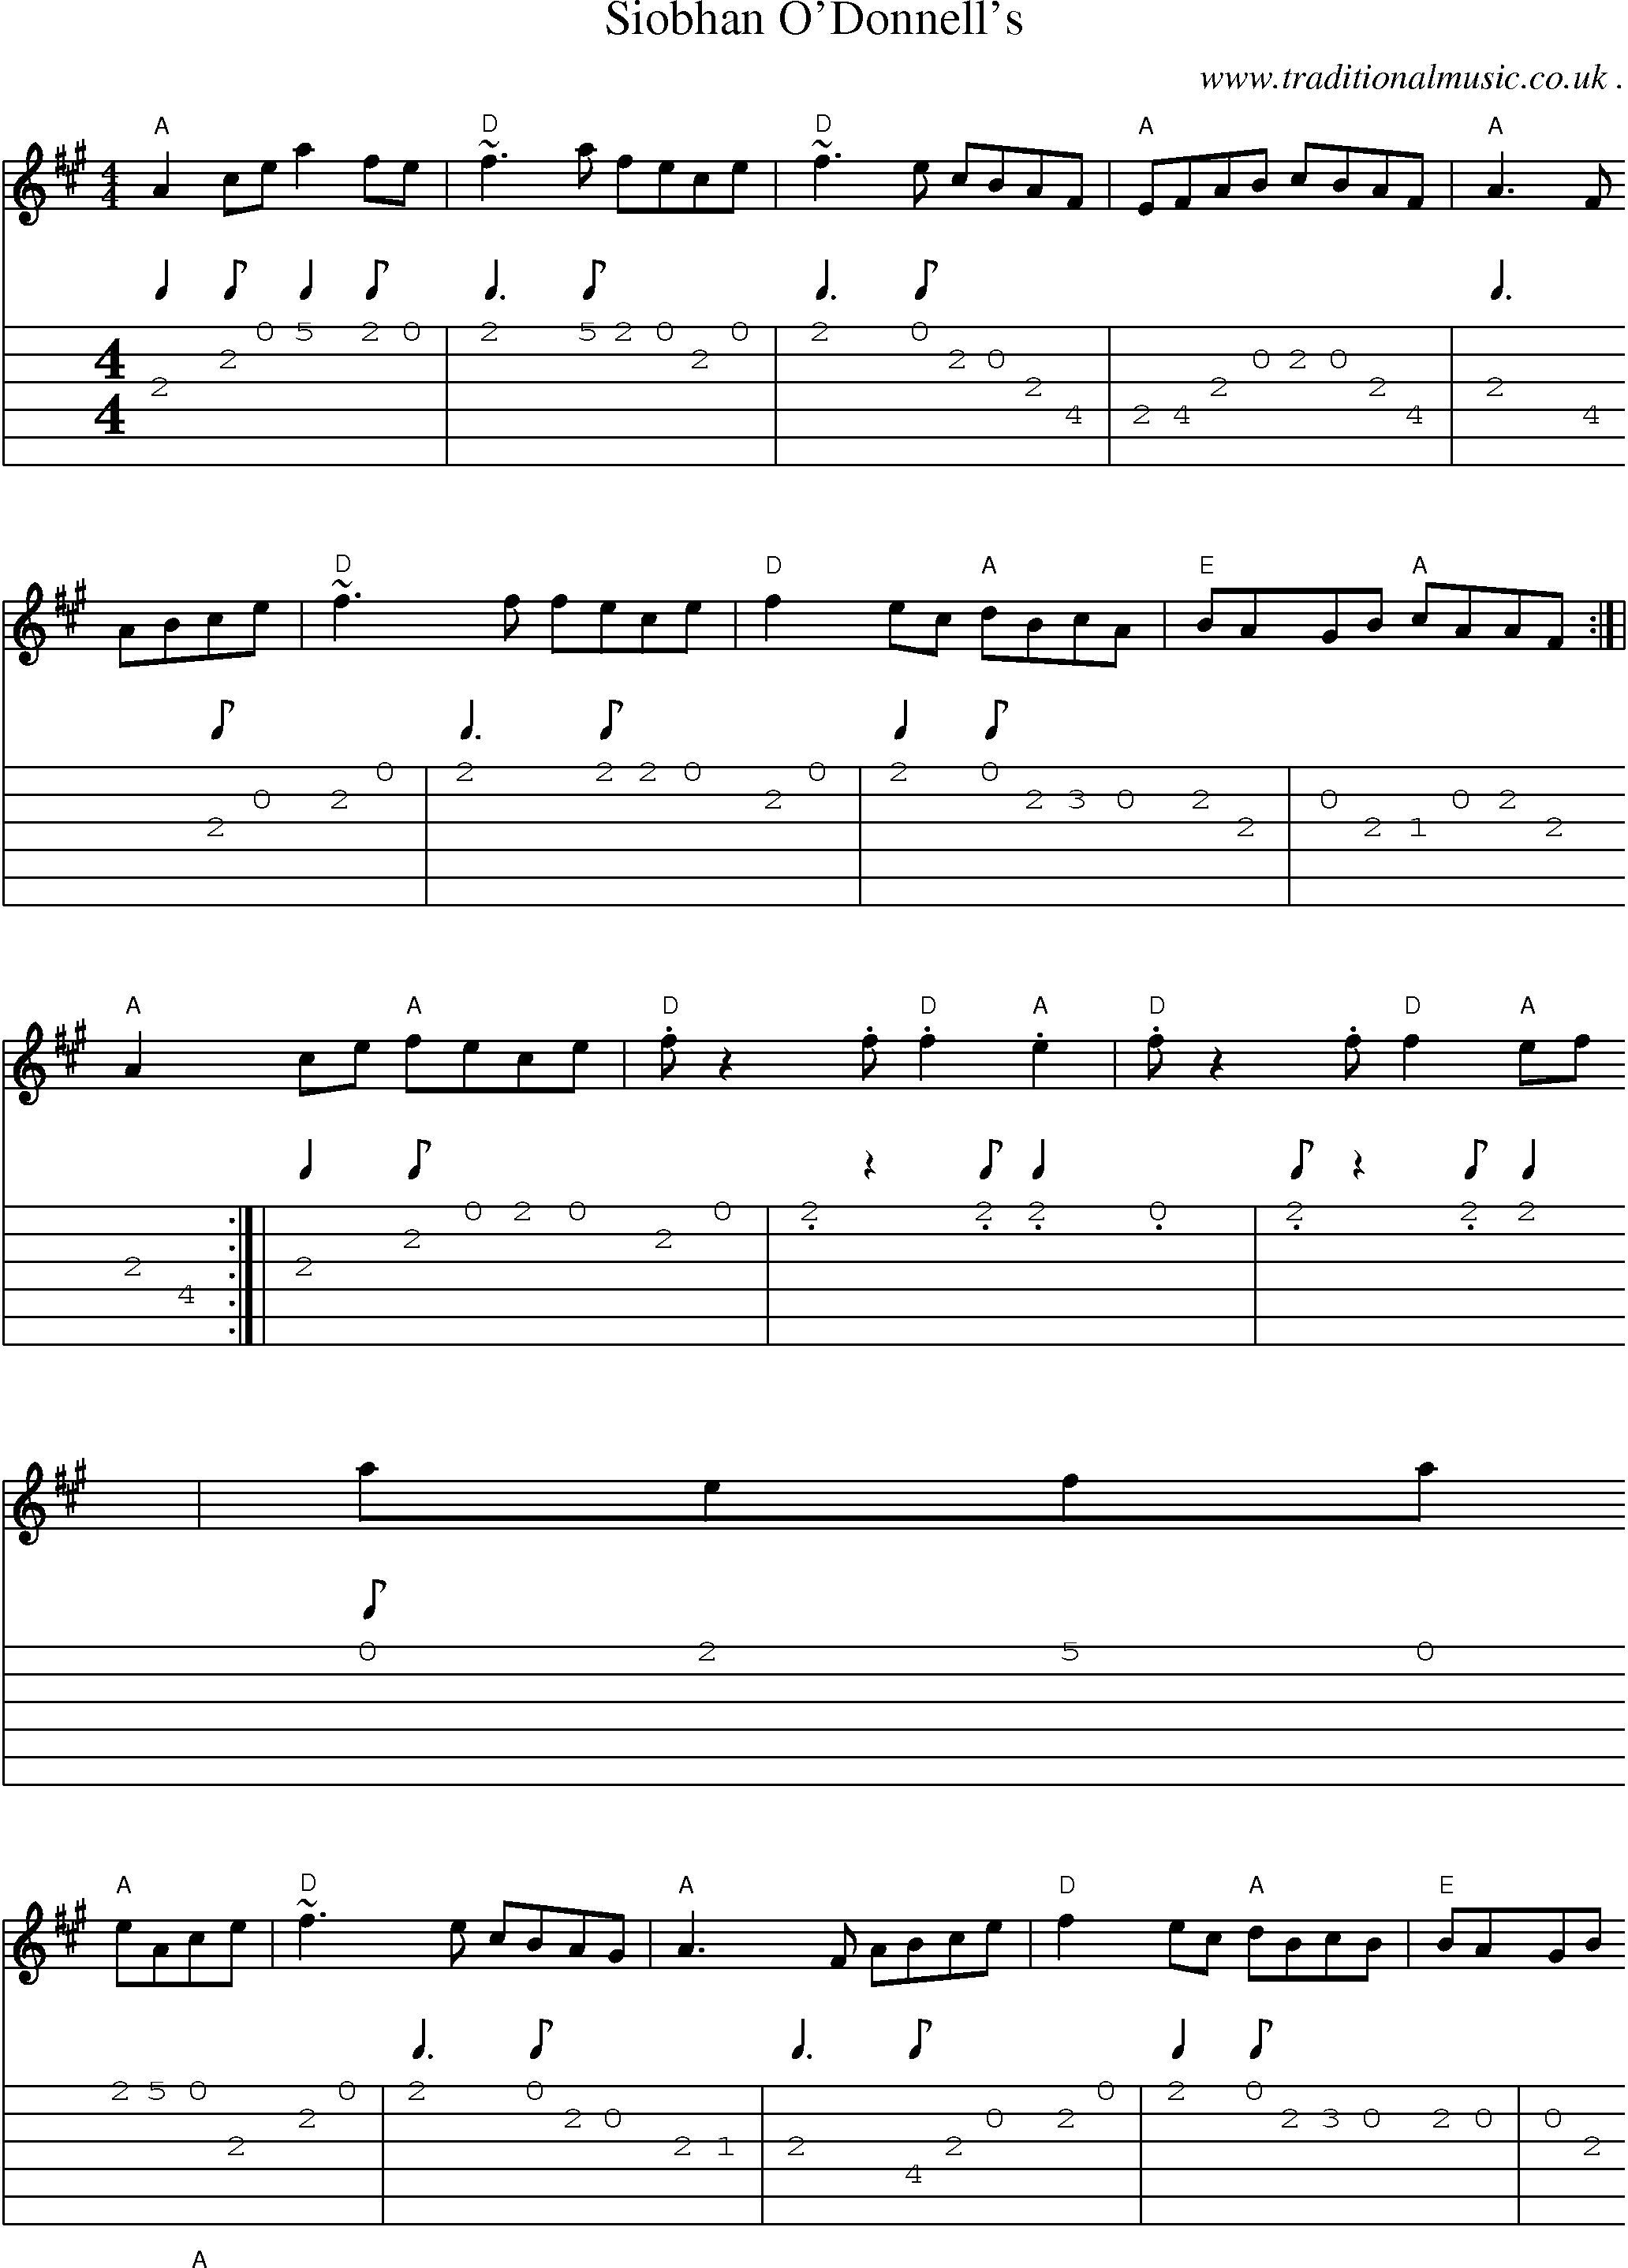 Music Score and Guitar Tabs for Siobhan Odonnells